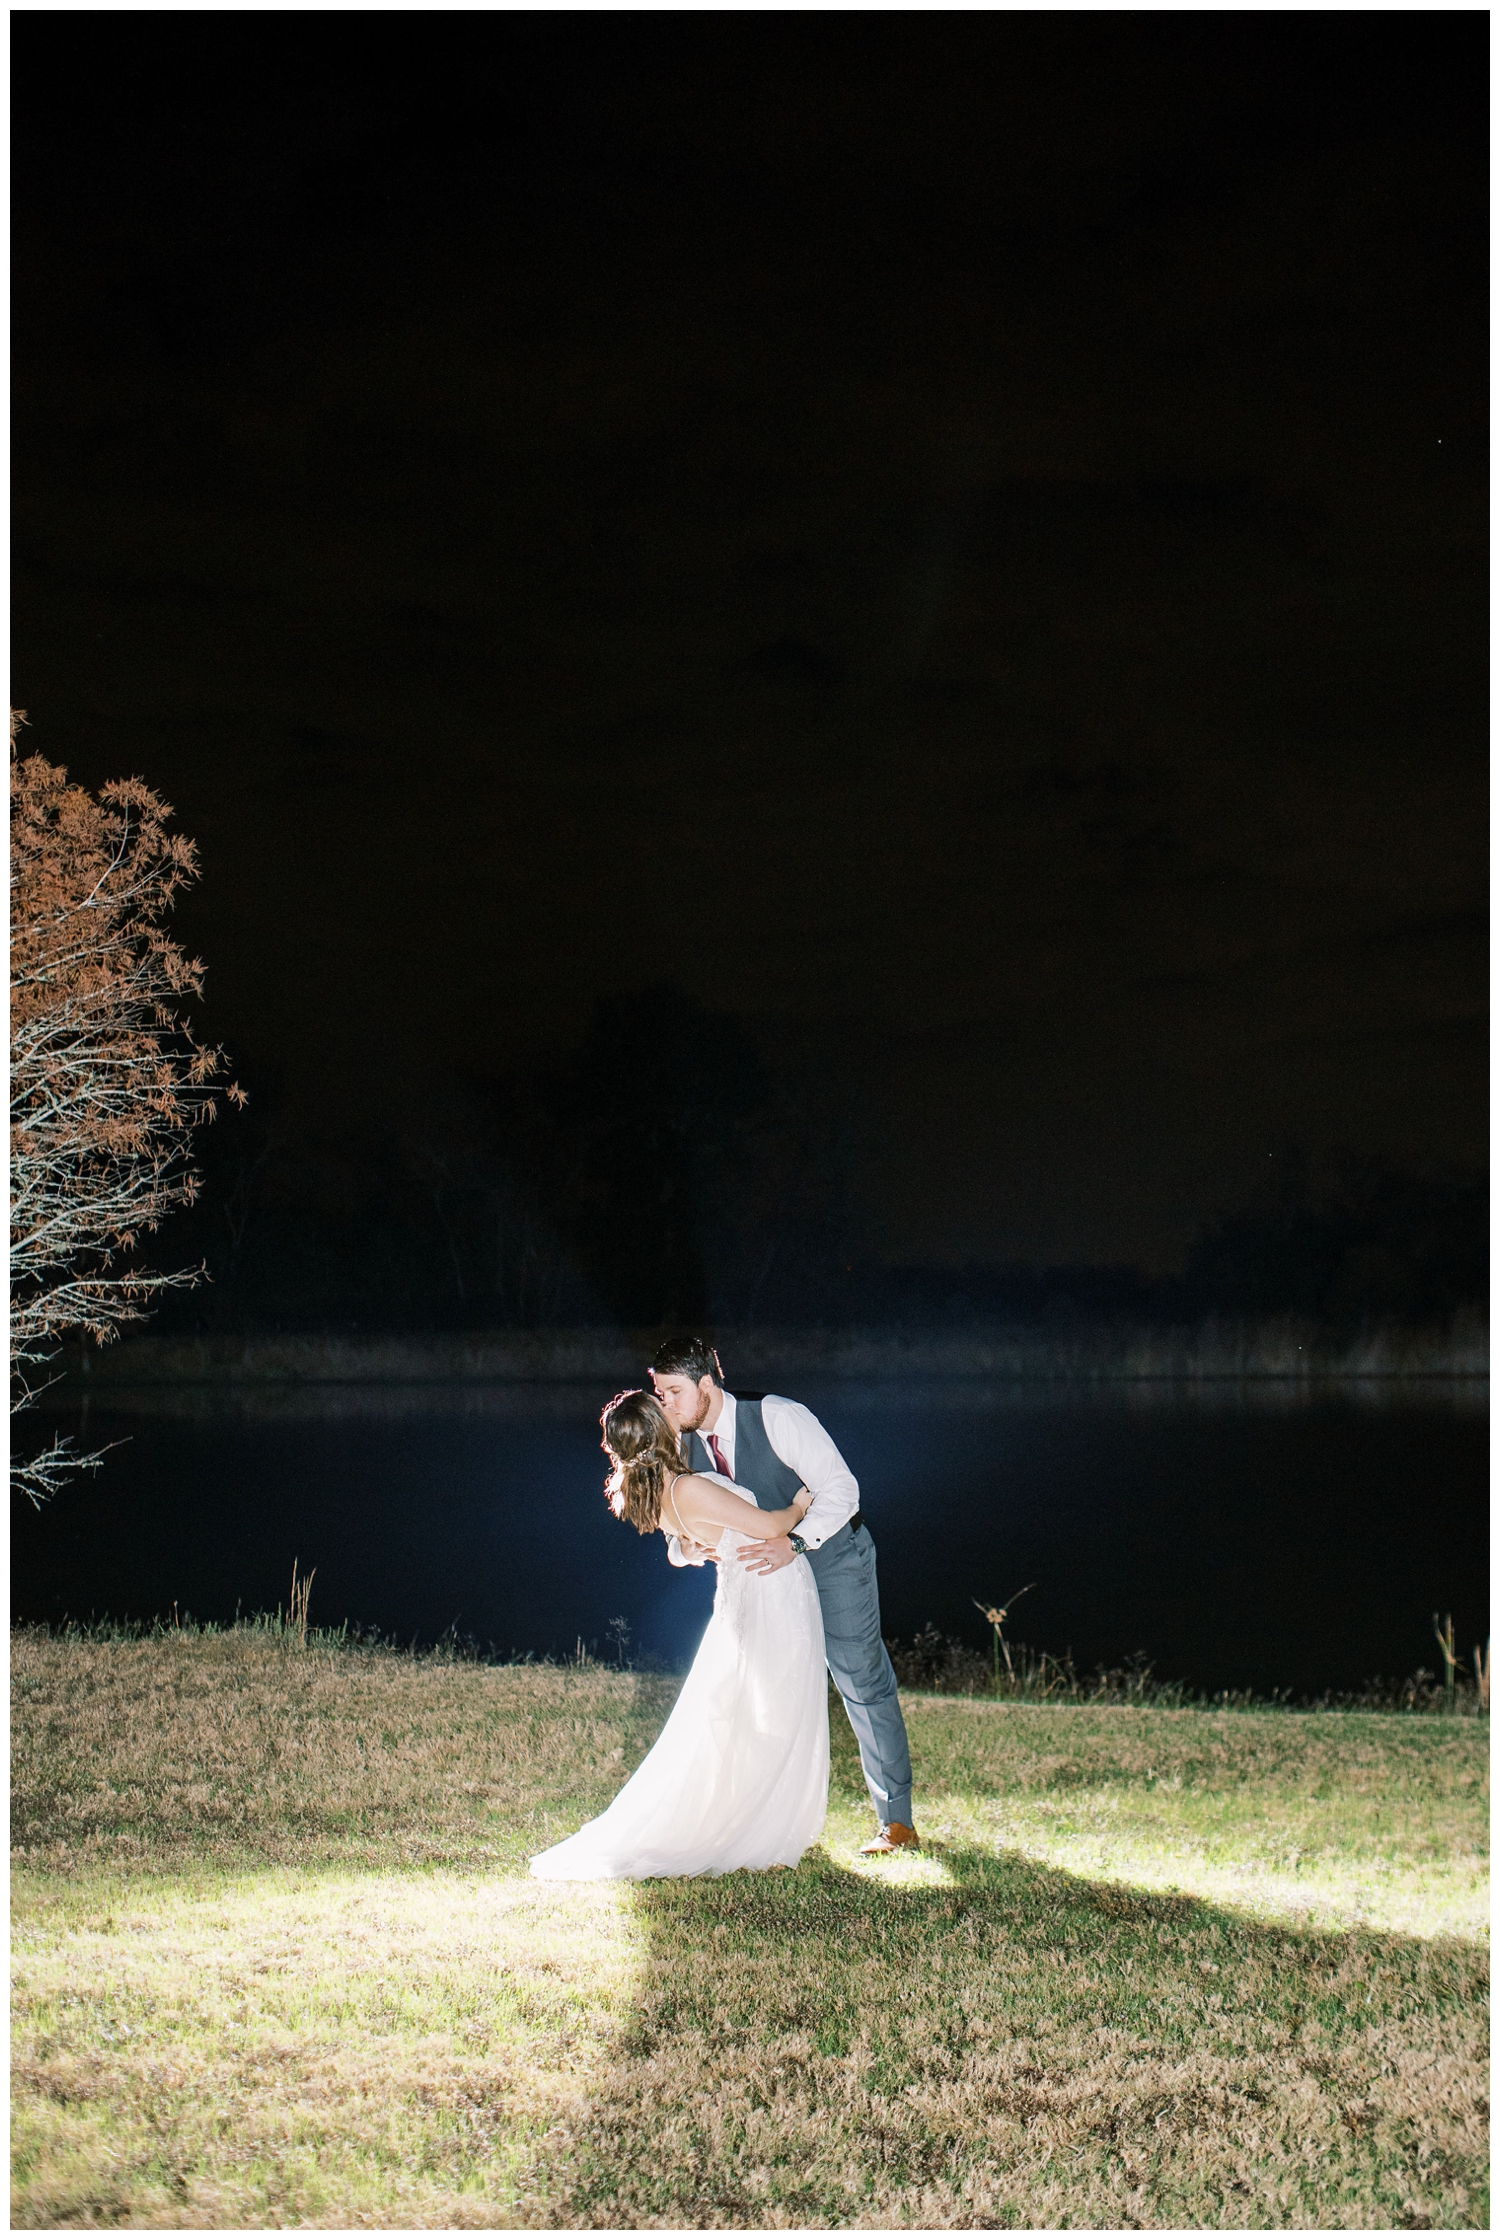 night time newlywed outdoor portrait